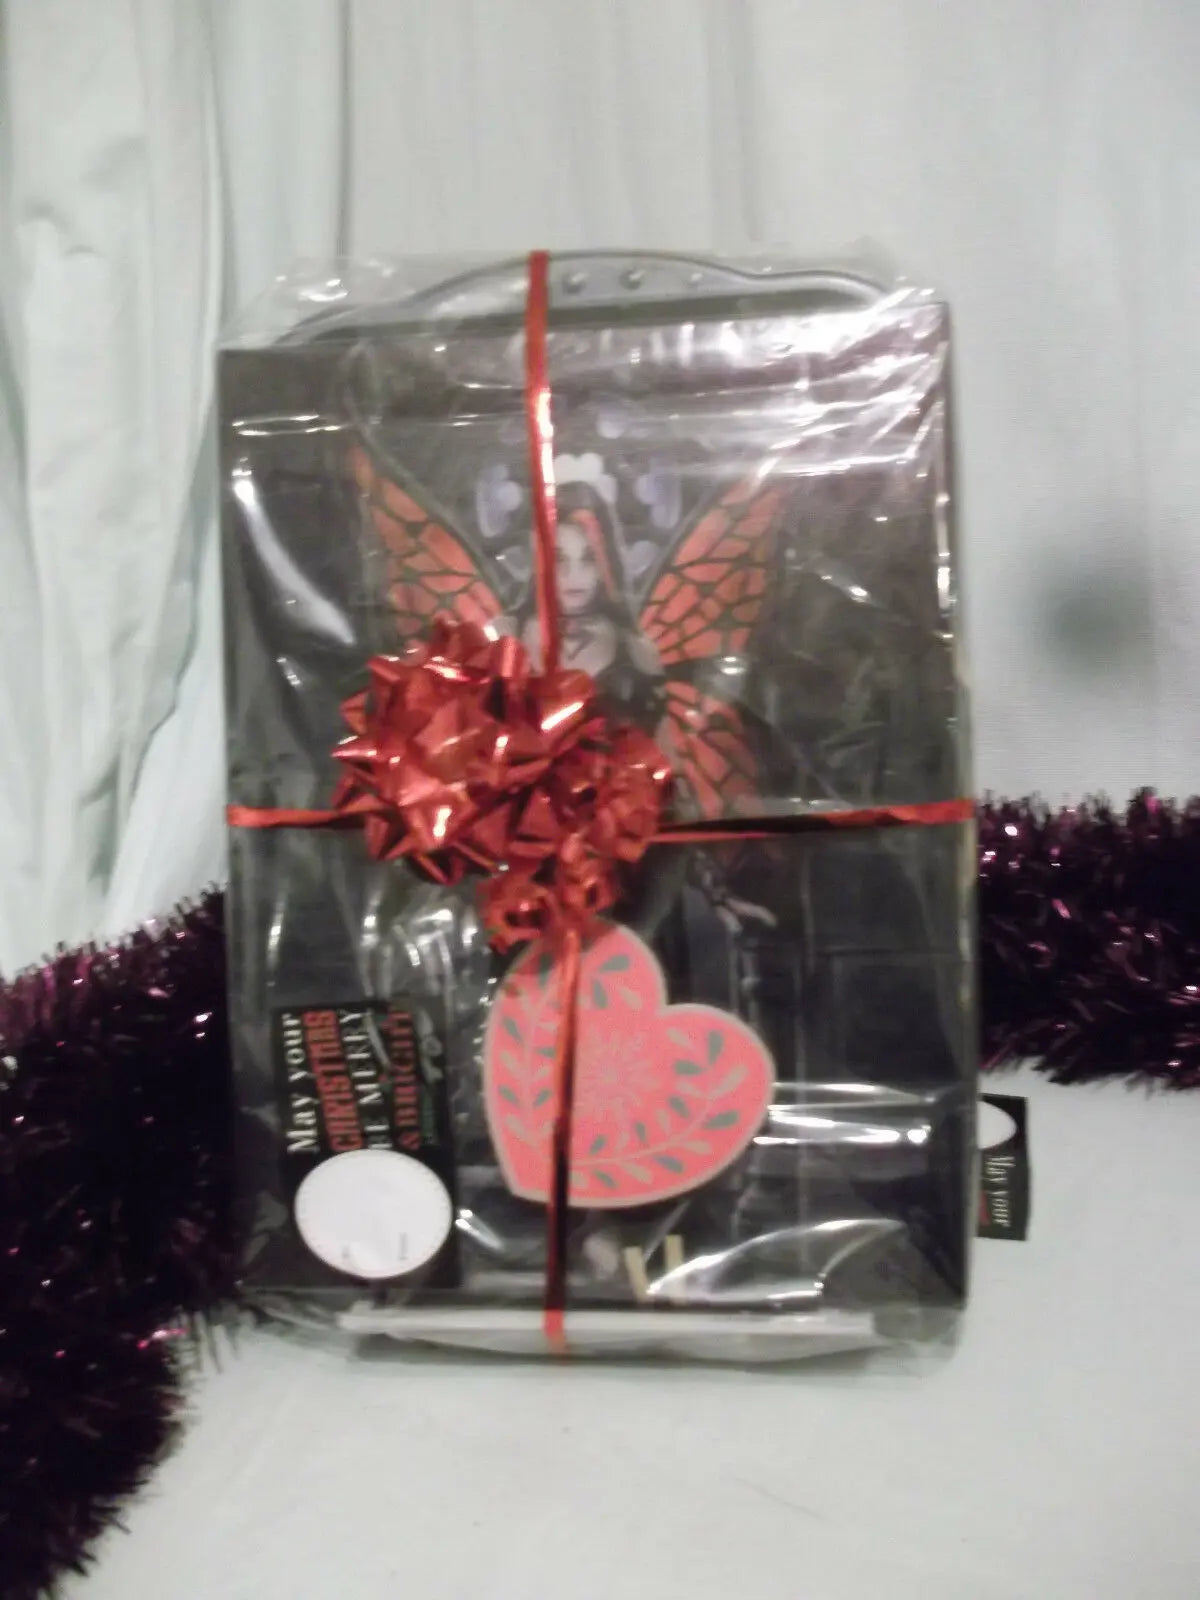 XMAS/PAGAN/WICCA GIFT SET-RAVEN/goth fairy-gift-wrapped-Wall plaque RAVEN CARDs, WONKEY d.